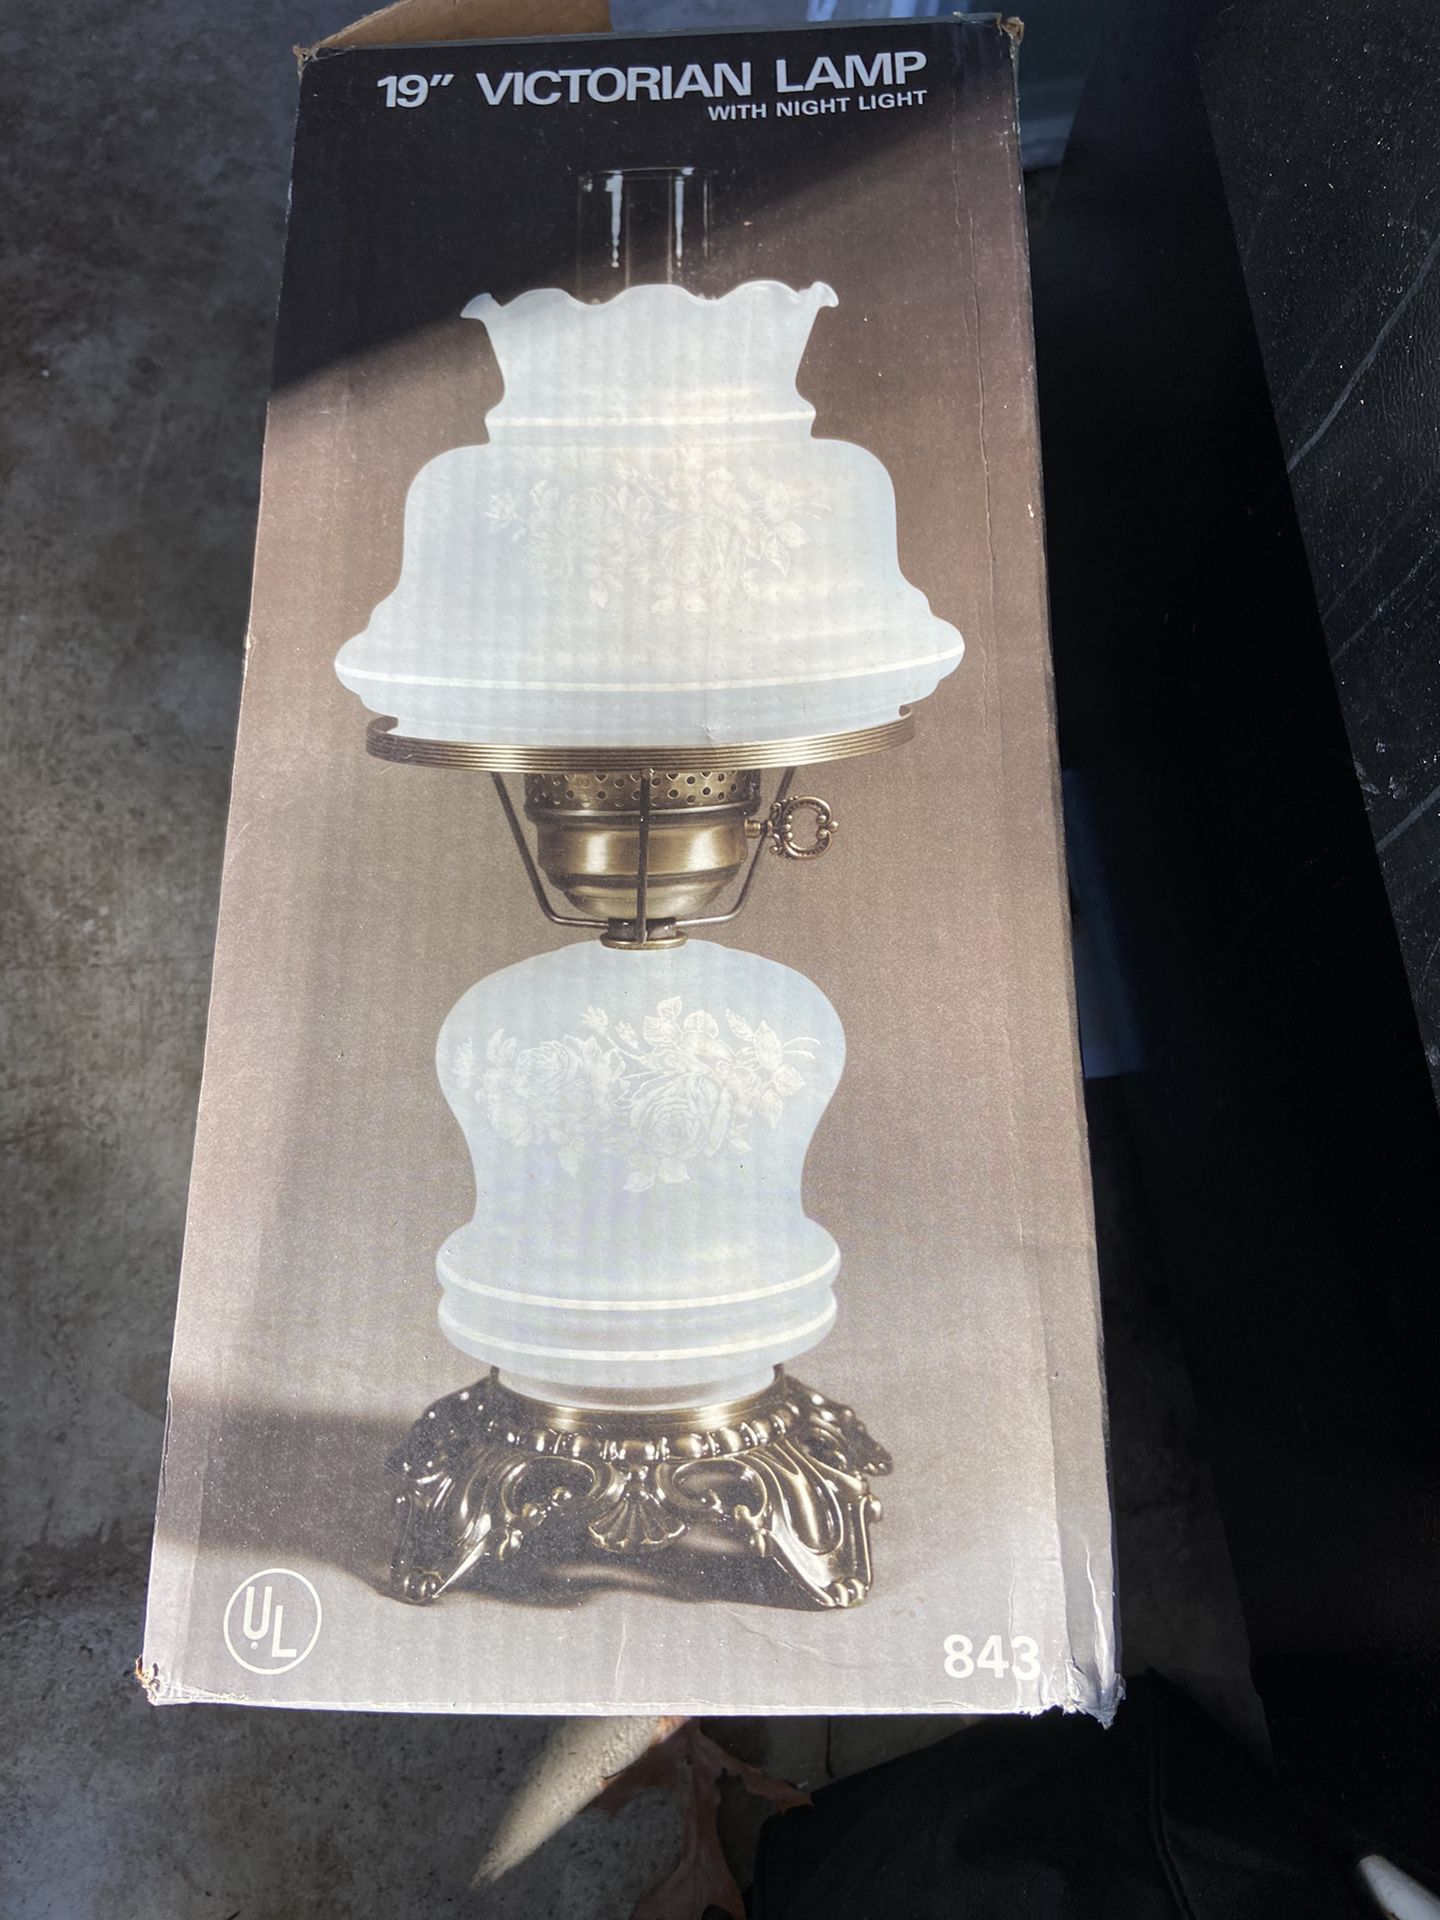 2 hurricane lamps, brand new never used